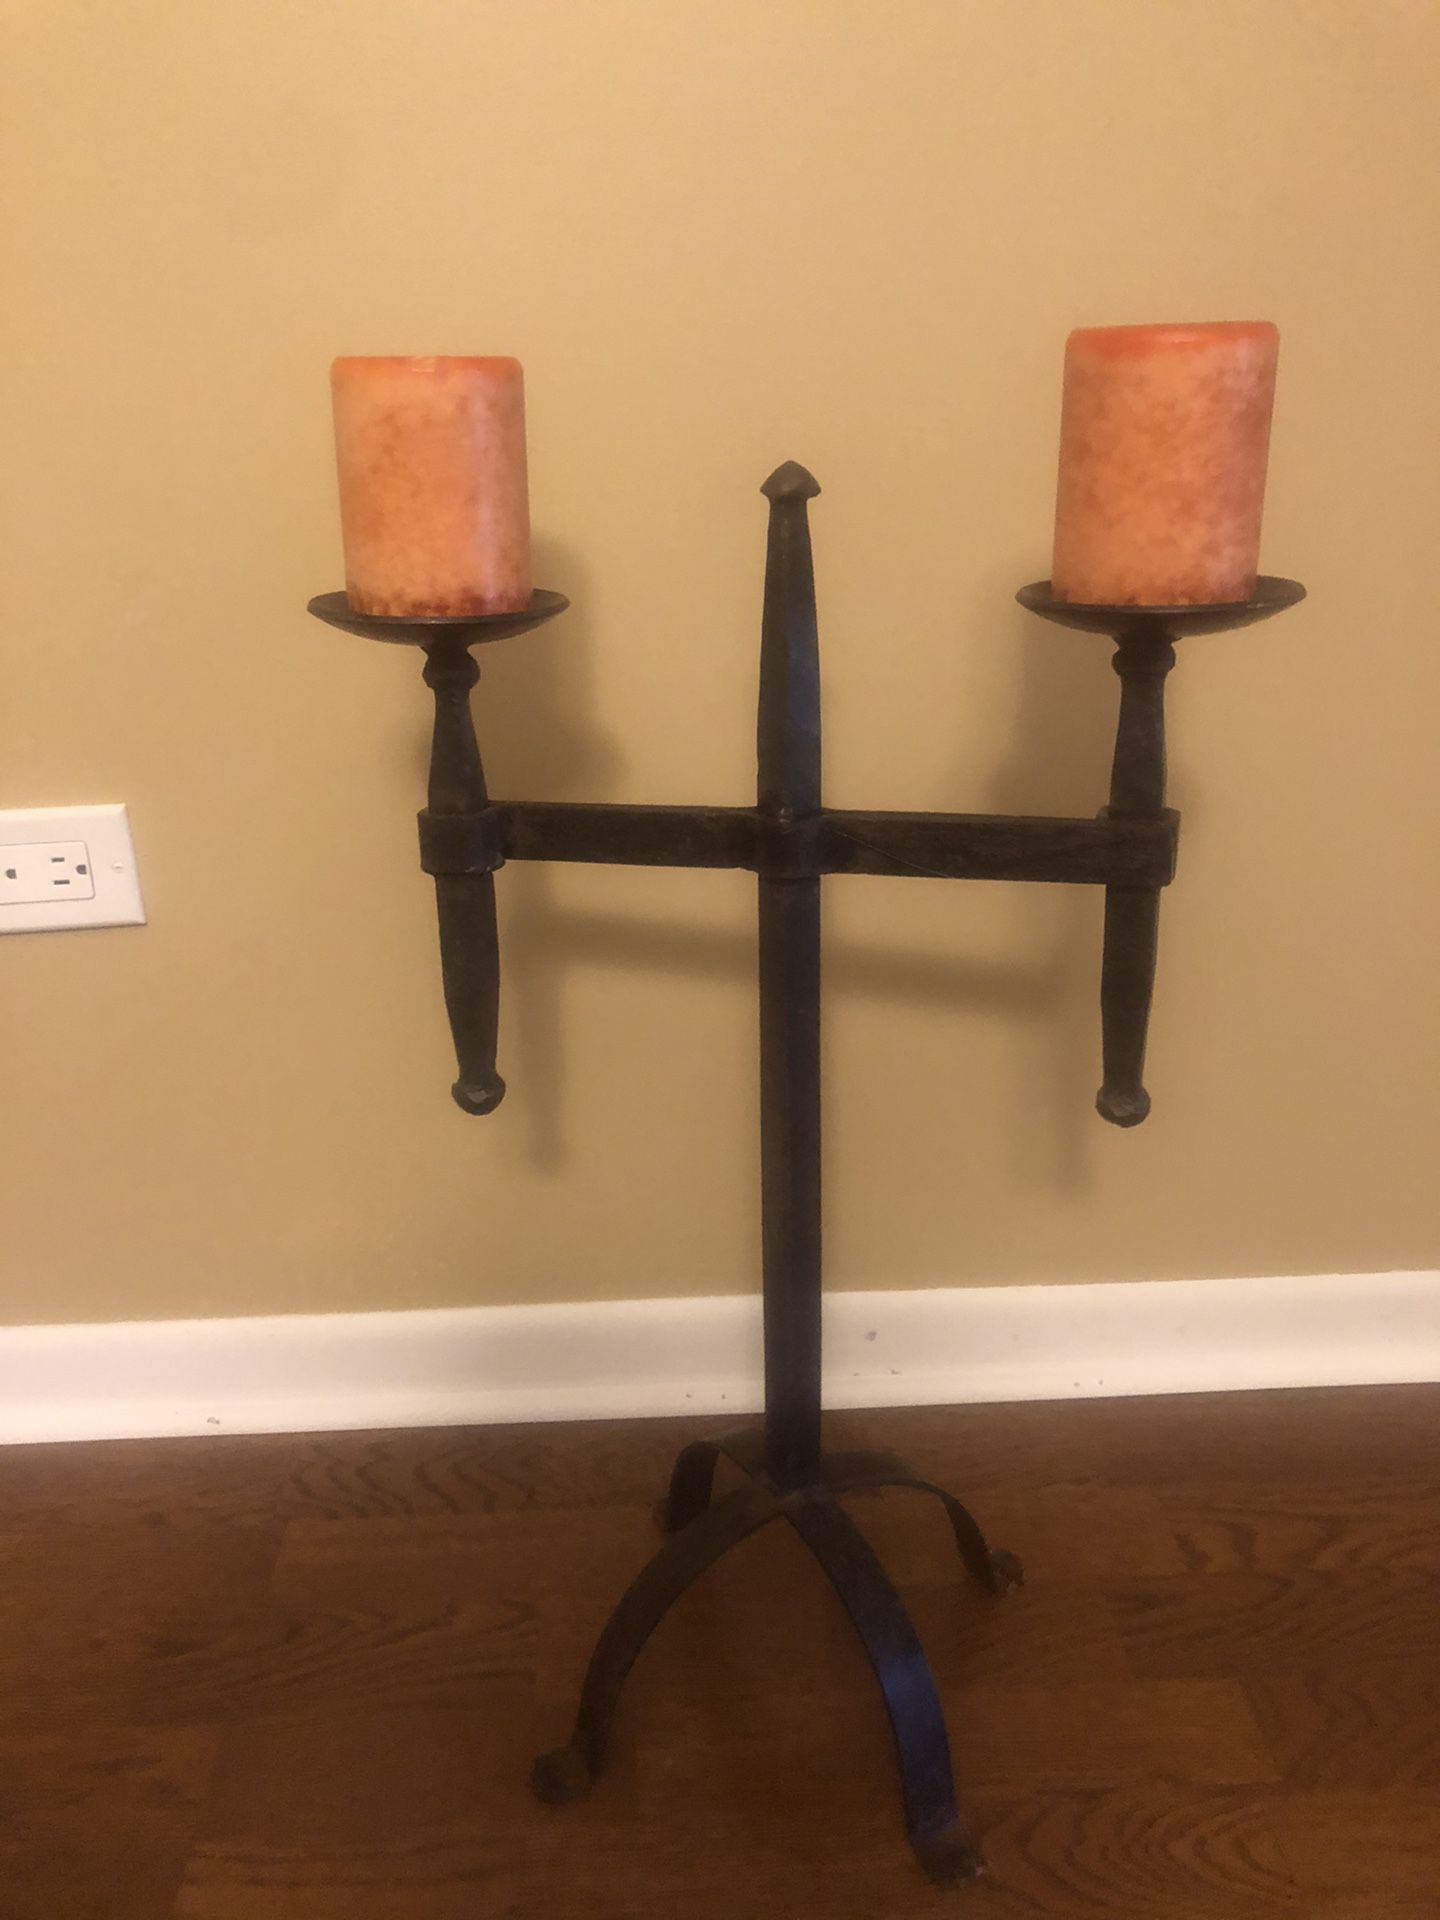 Large Rustic Iron Patinated Mid-evil Style Candle Holder (includes the two candles shown)